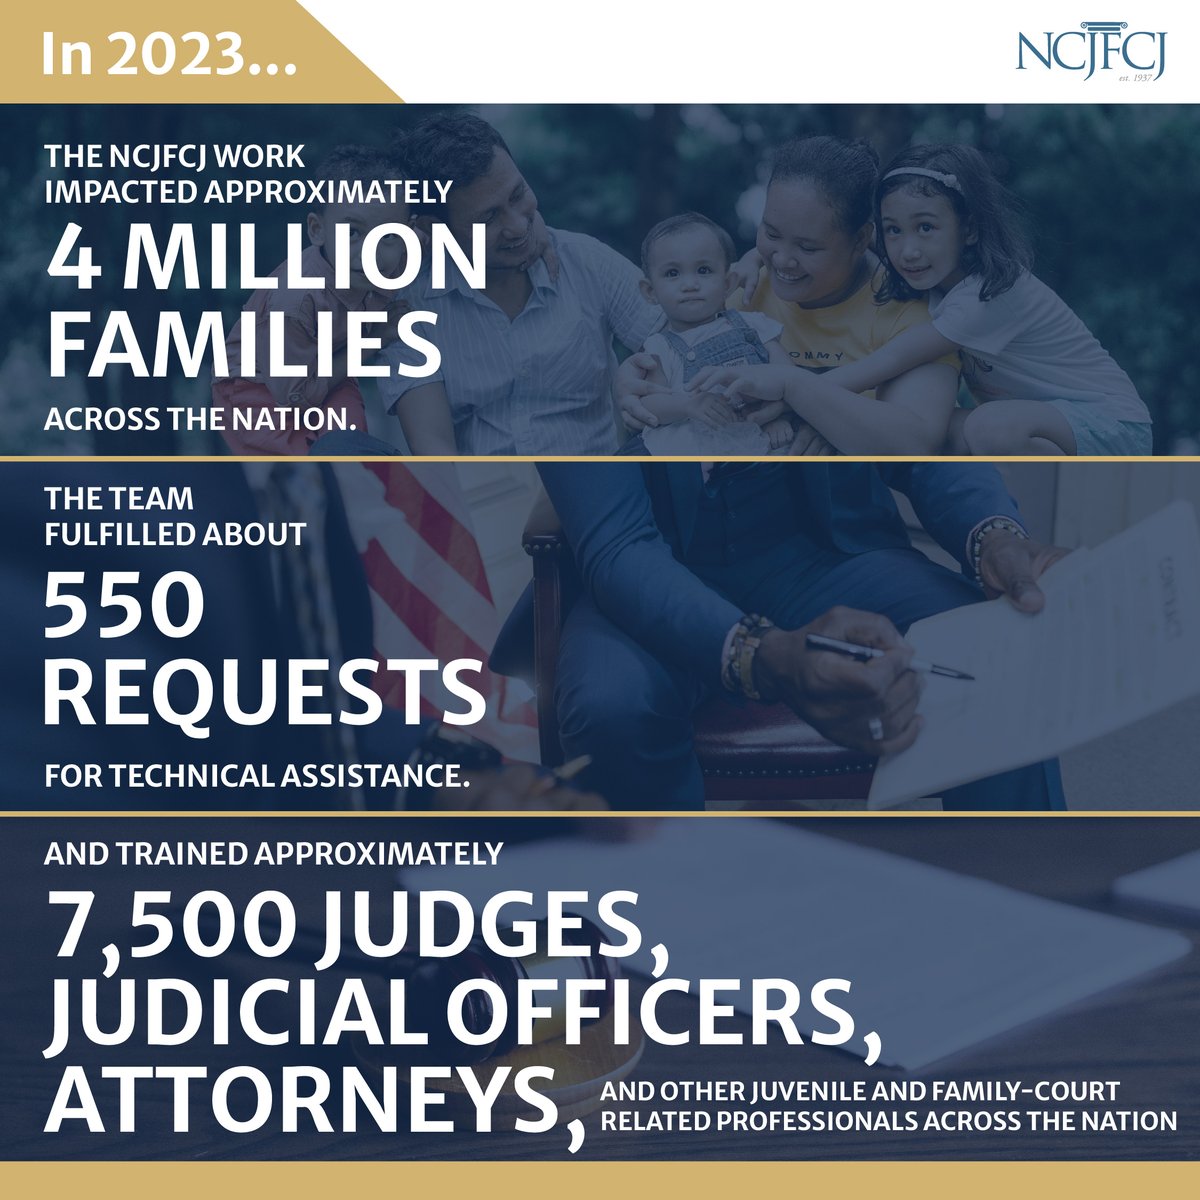 The month of May marks the 87th anniversary of the NCJFCJ! We are so proud of the work we have accomplished over the last 87 years for children and families. We look forward to continuing to serve children, families, and survivors in the coming years.